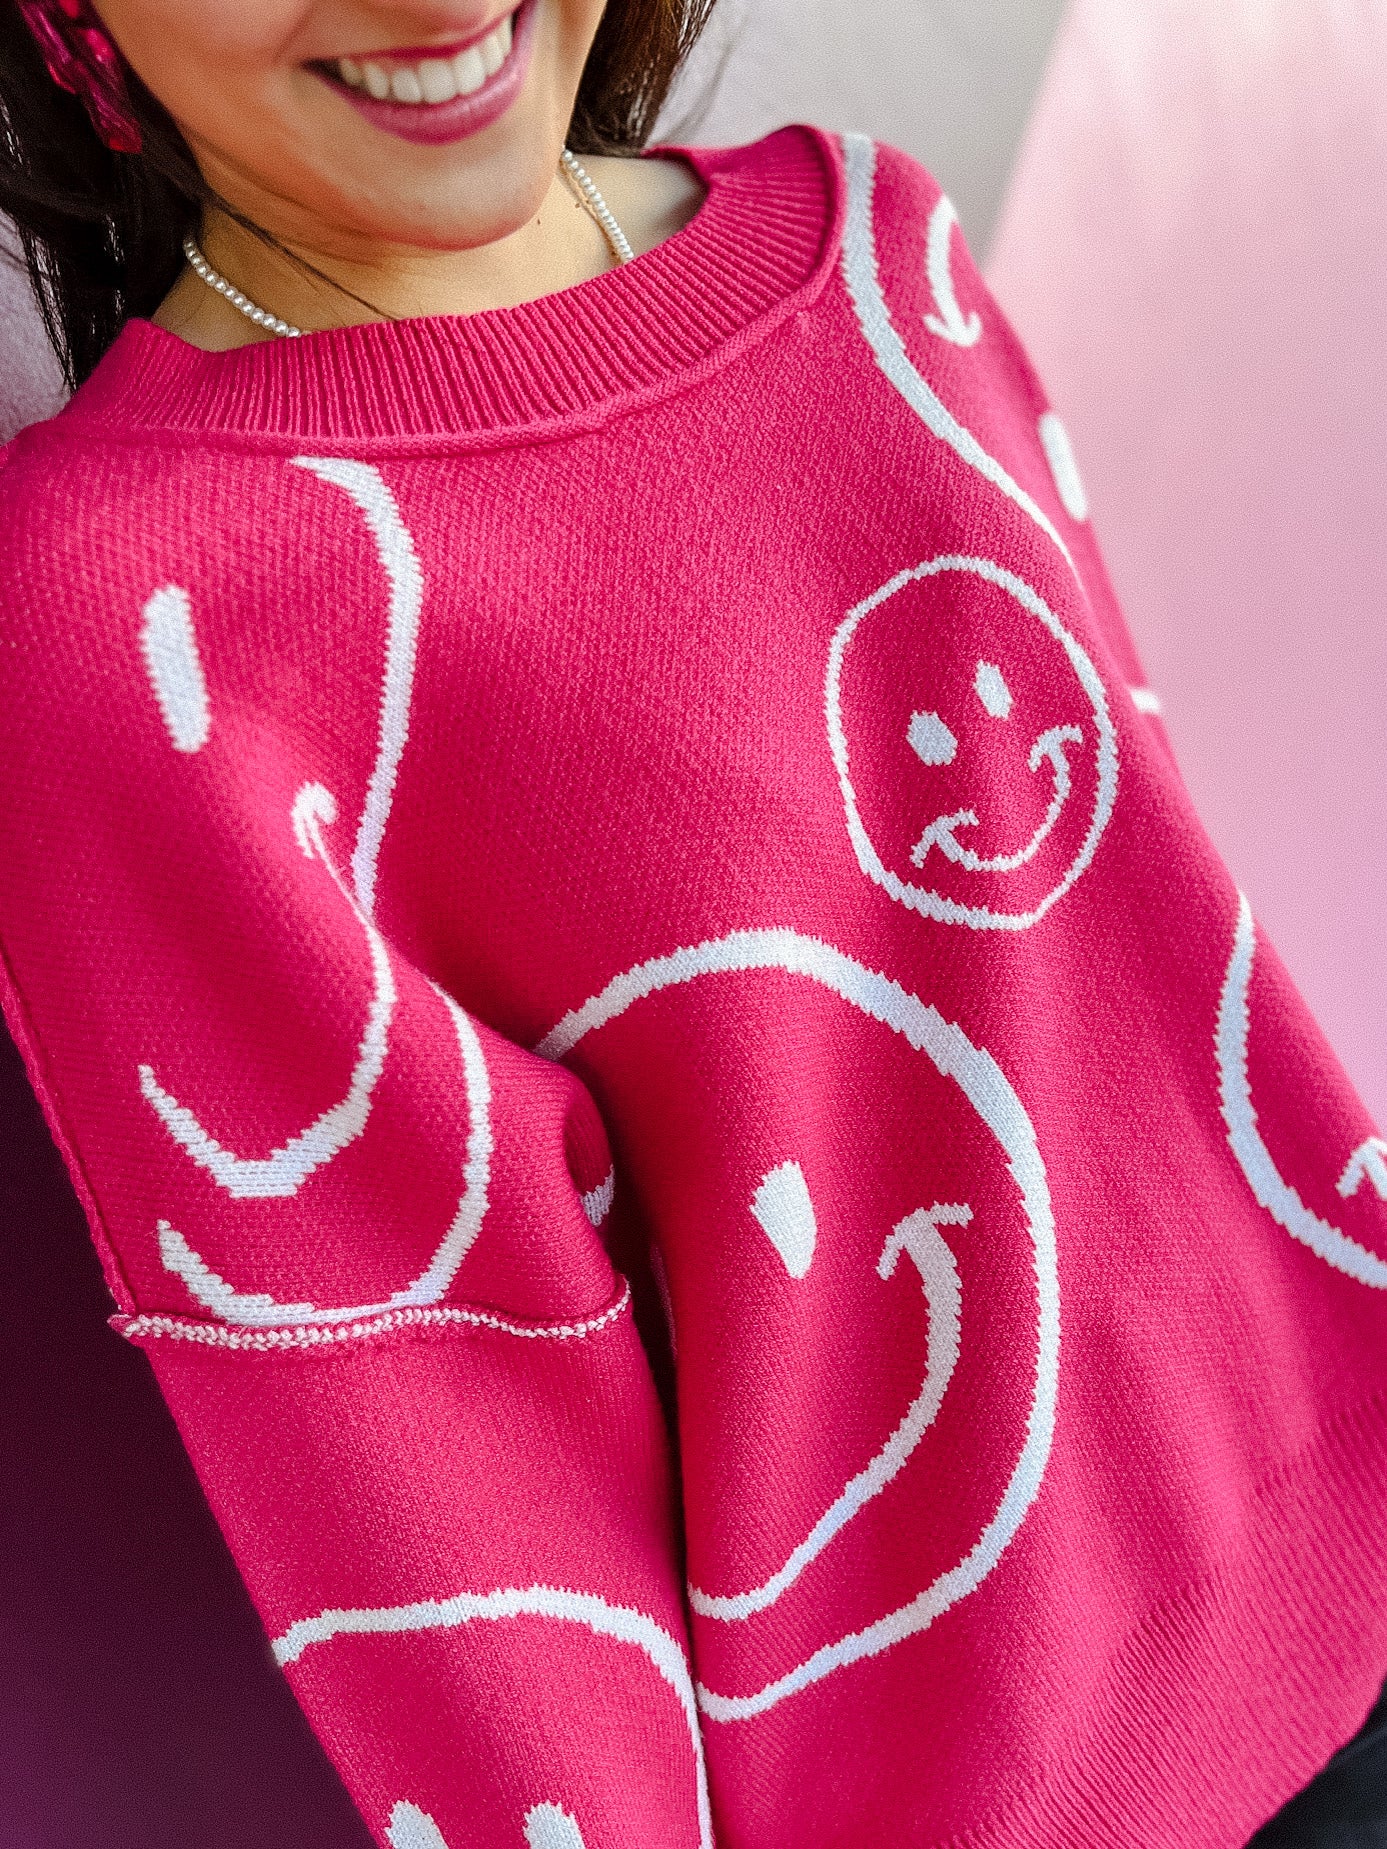 Eloise Happy Face Sweater - Raspberry + Soft White